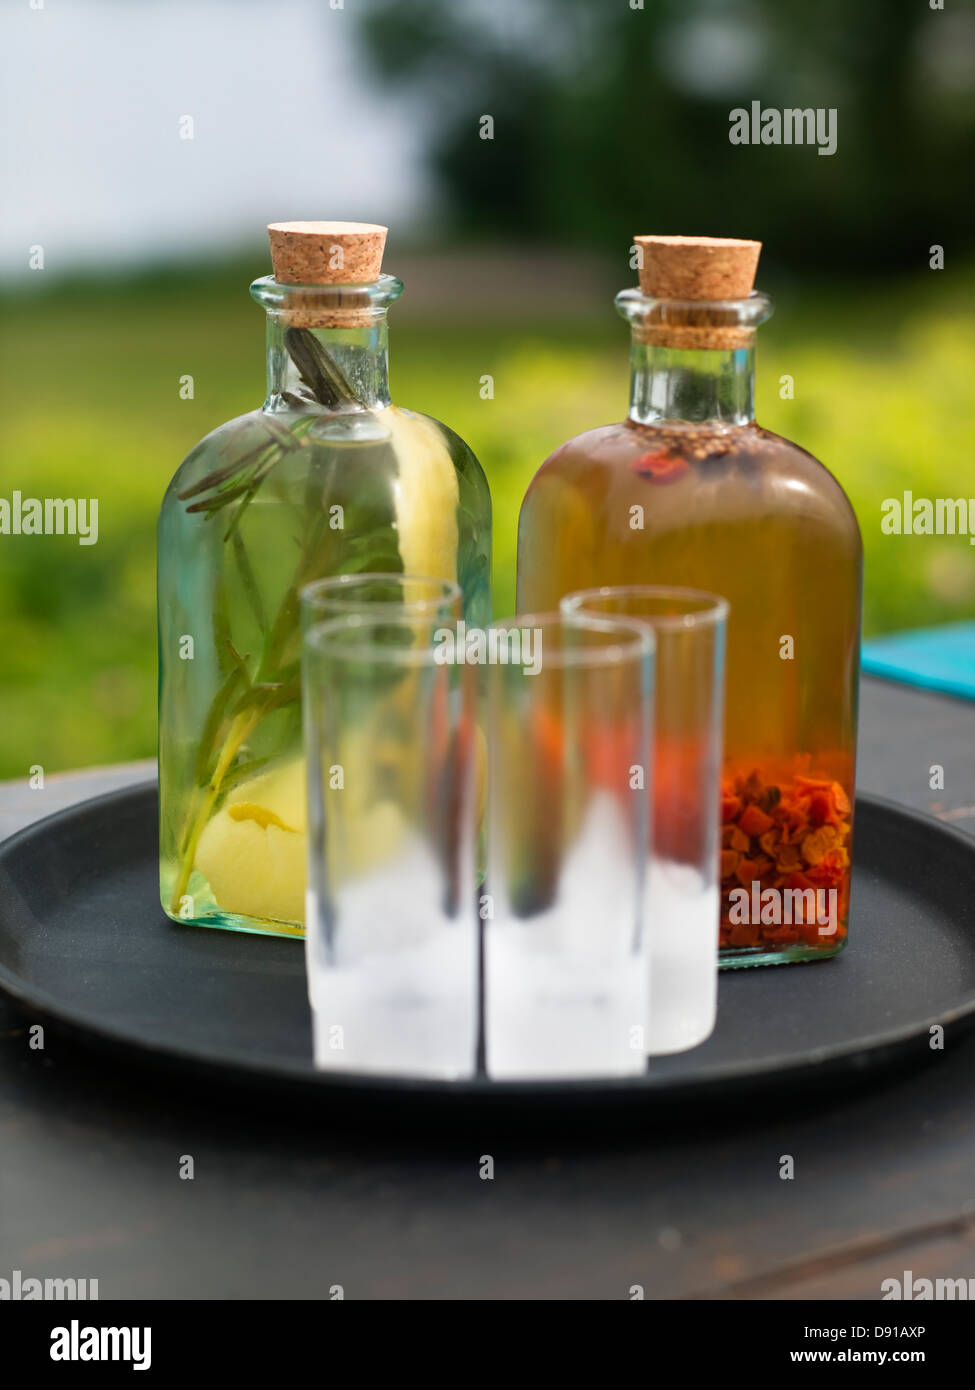 Bottles of snaps on a tray, close-up. Stock Photo